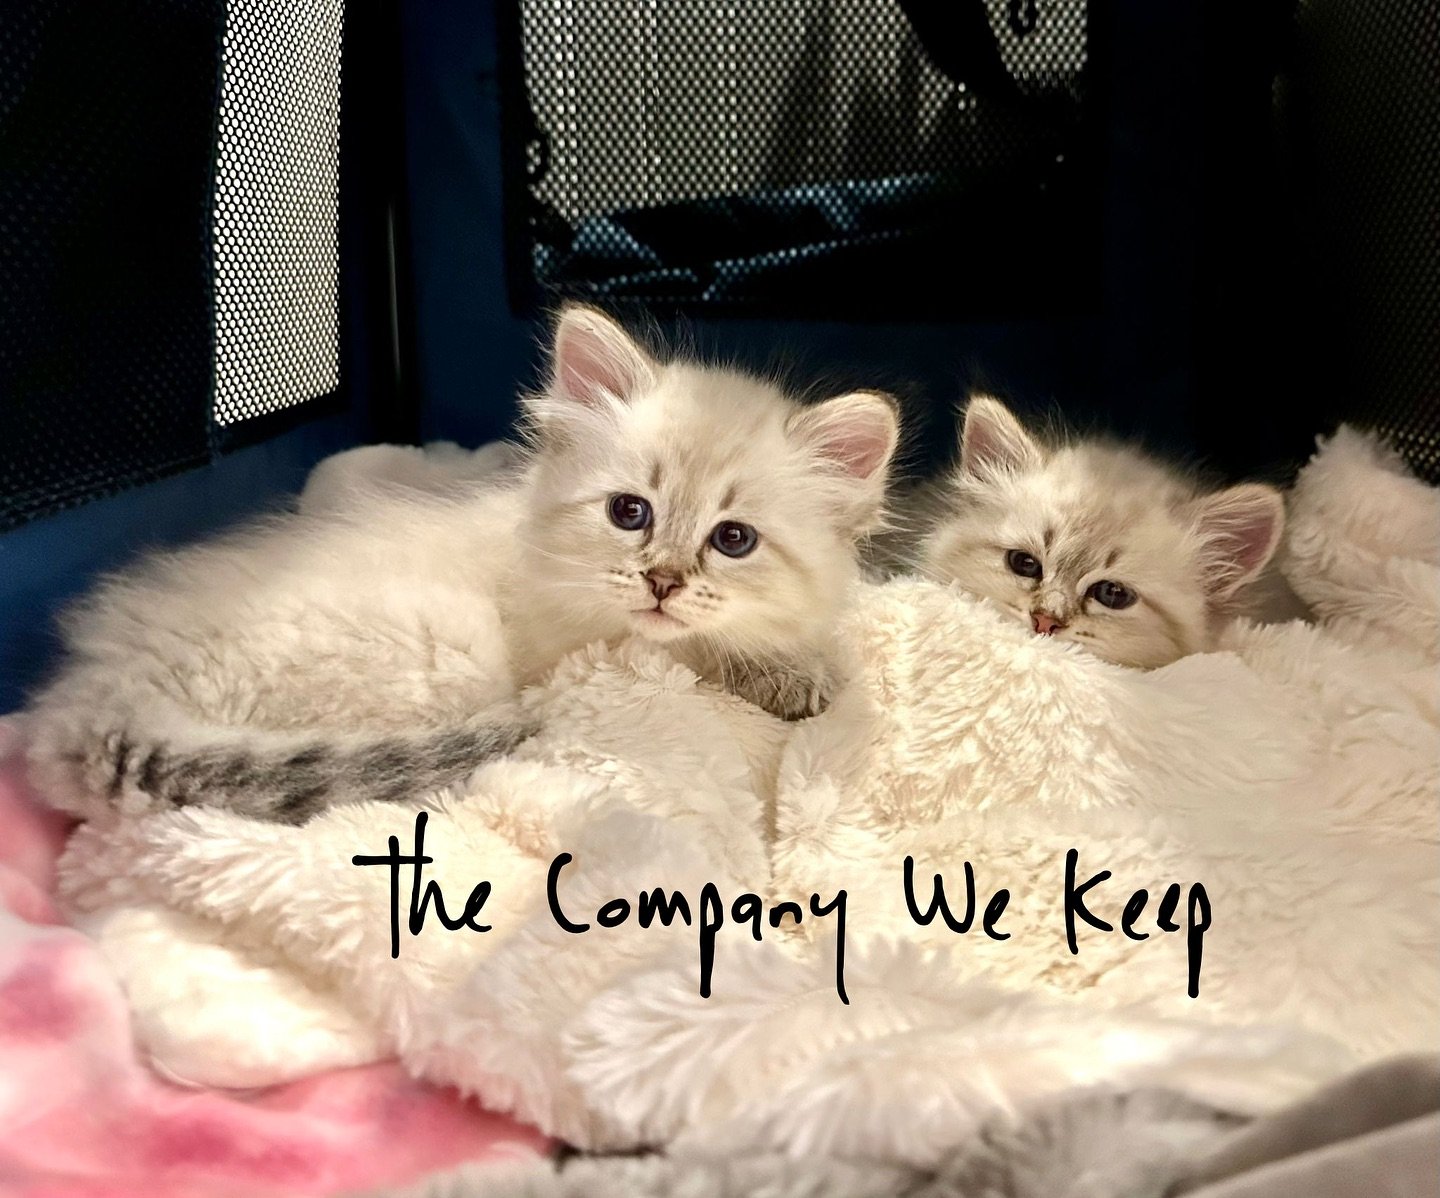 Shameless cat content. 😻 A friend got new kittens and what better way to remind you of our current open call for Issue 5 of kerning!! The theme this time is &ldquo;the company we keep.&rdquo; Submit your poetry, short or flash fiction, creative nonf